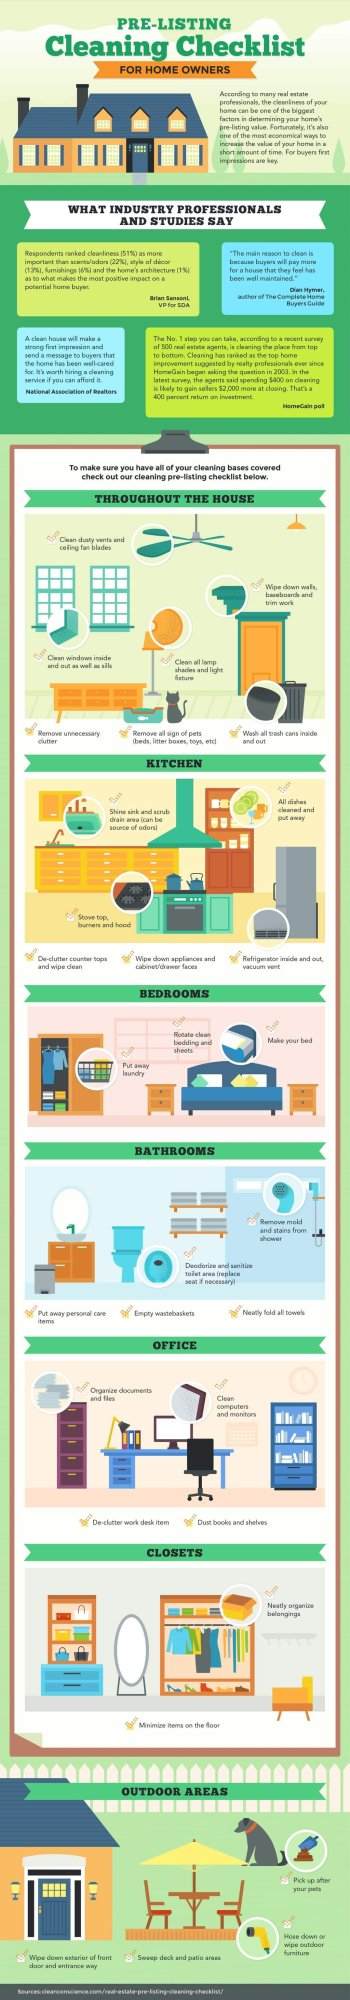 31 Great Cleaning Tips Pre-Sale Checklist For Your Home (Infographic)